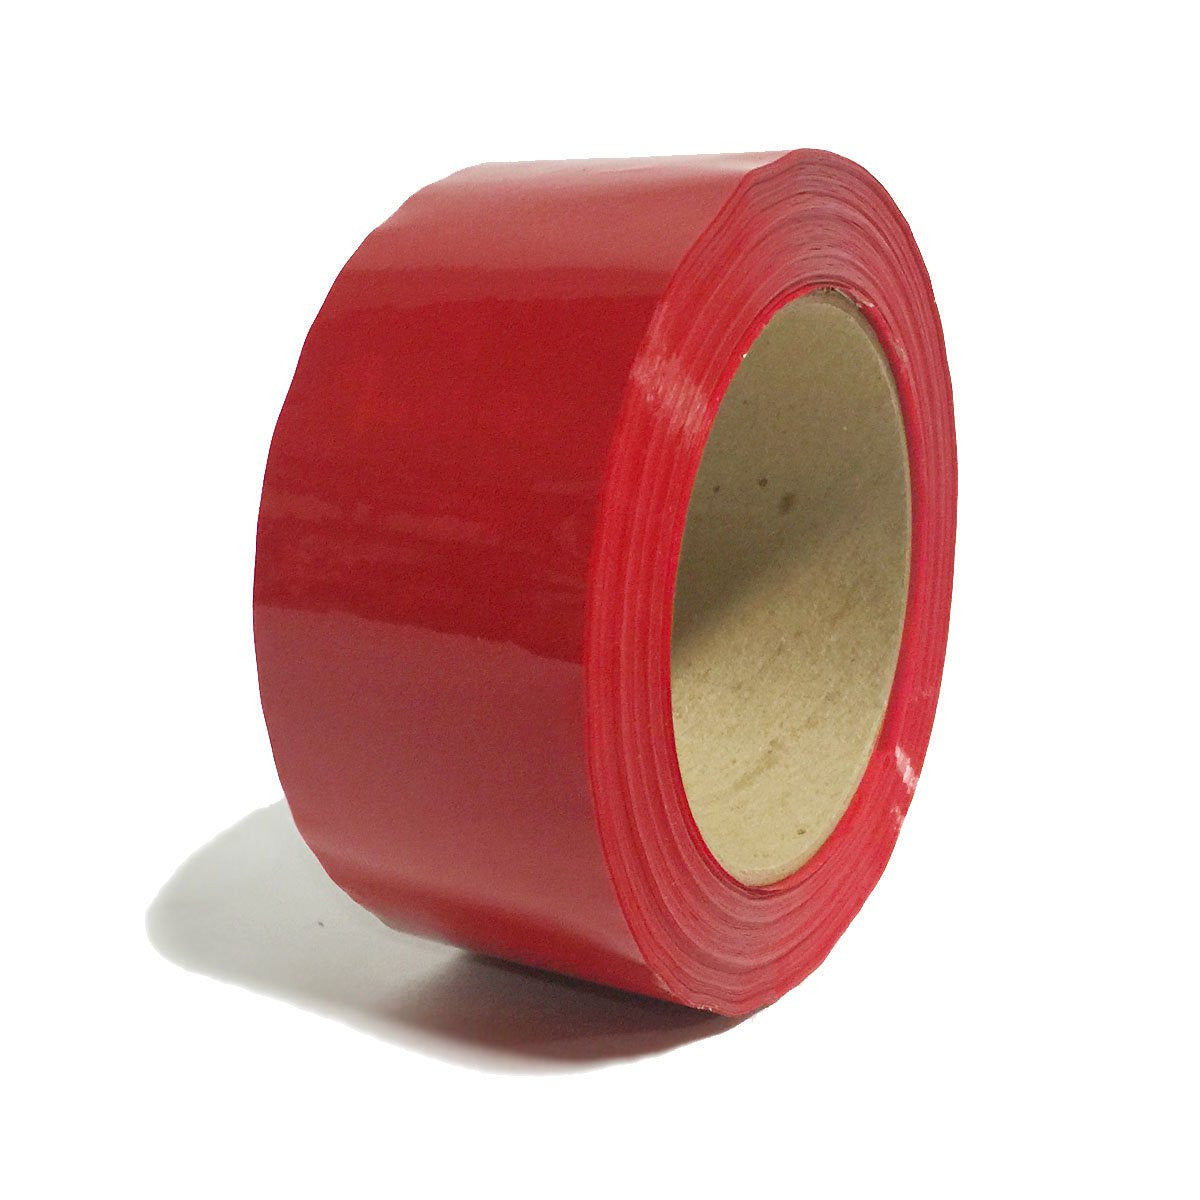 36 Rolls / Case 2 x 110 Yards 2 Mil Color Packaging Tape